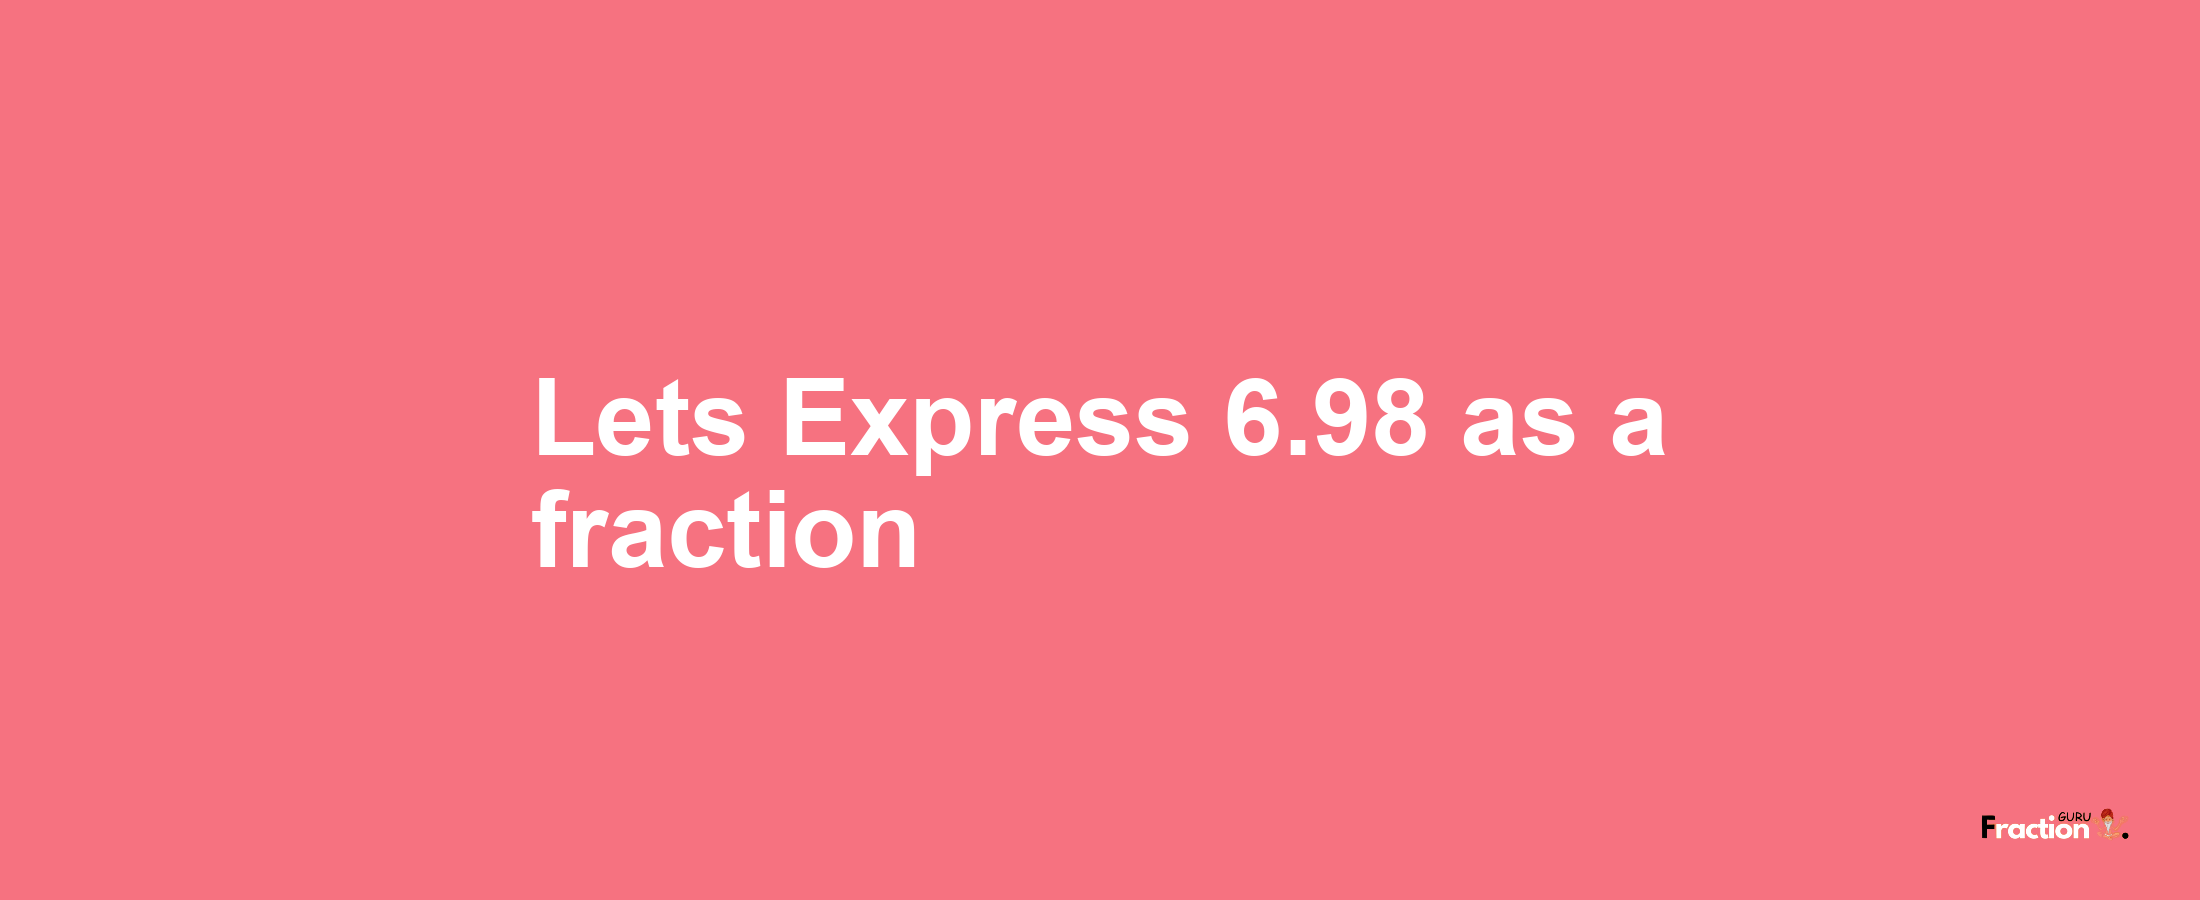 Lets Express 6.98 as afraction